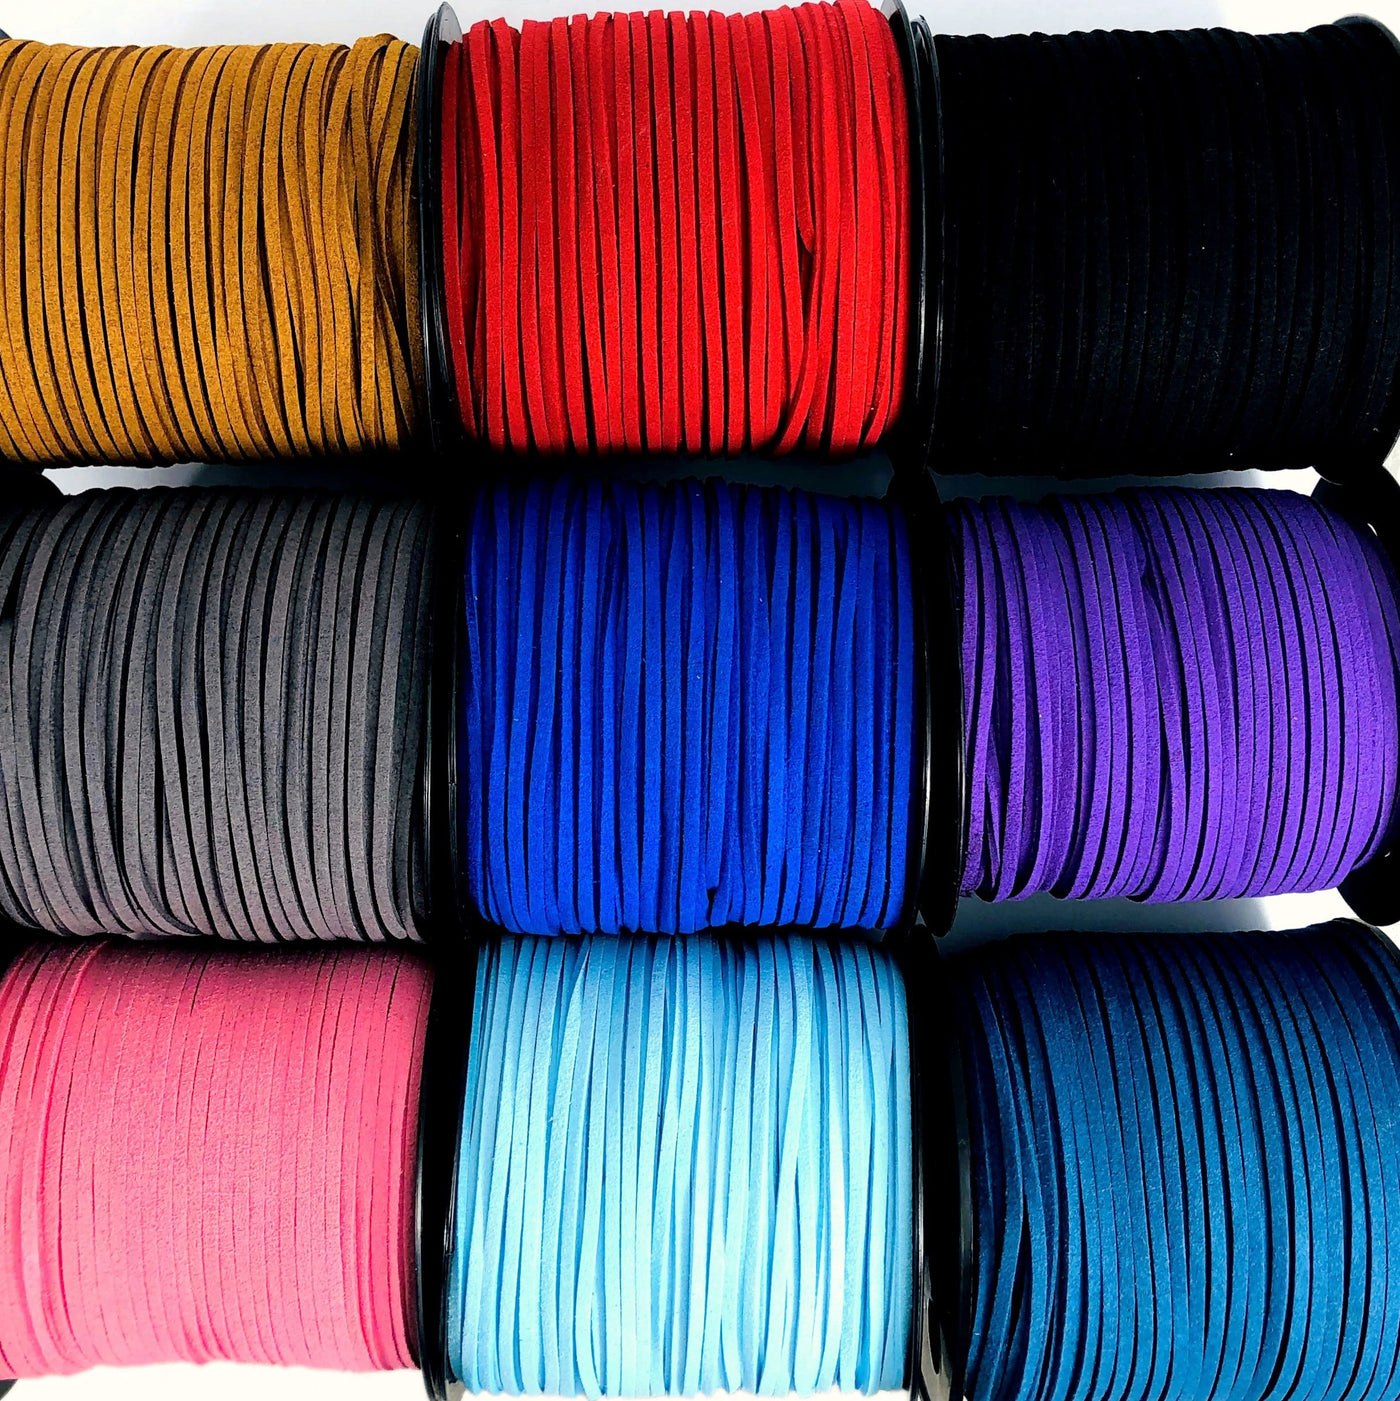 Leather Cord String AVAILABLE IN THE COLORS: - Brown - Teal - Baby Pink - Black - Red - Baby Blue - Purple - Gray - Blue